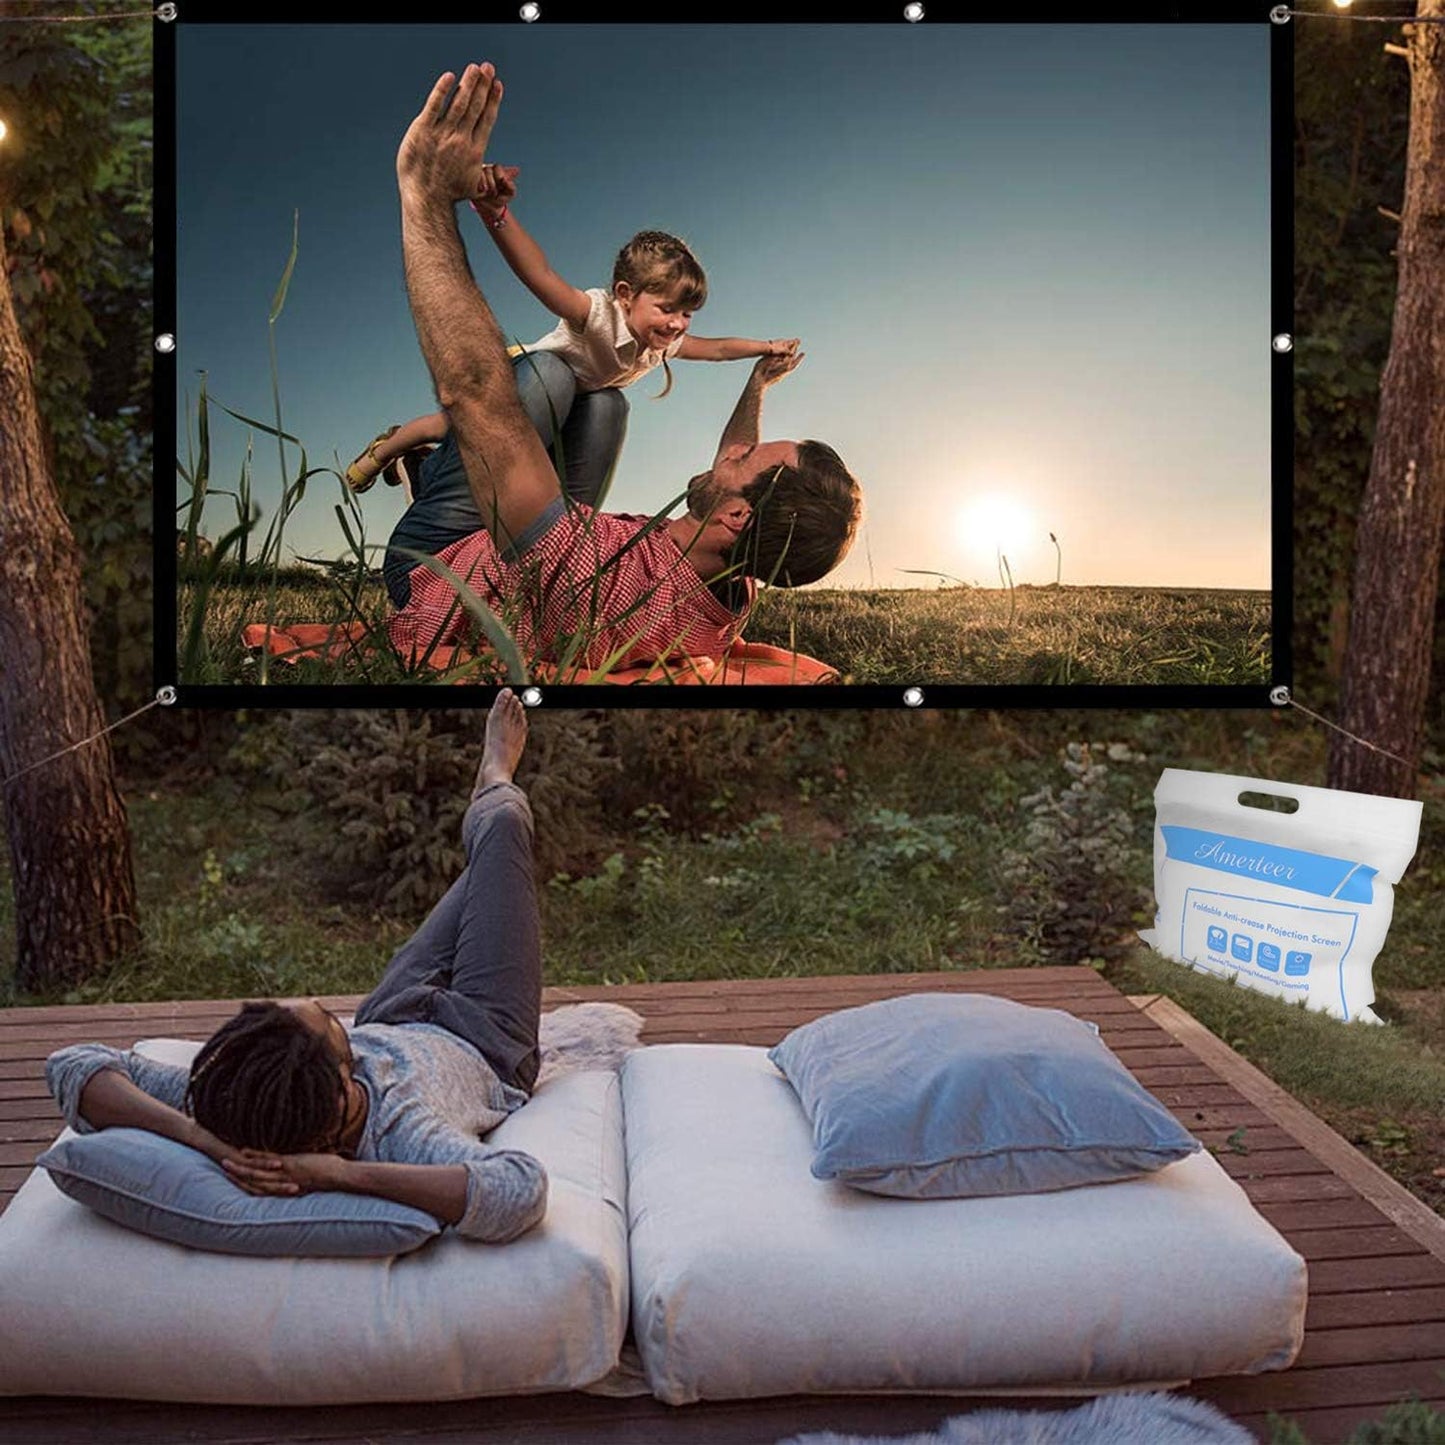 AMERTEER Projector Screen | Screen Projector Outdoor | Outdoor, Indoor, Backyard Projector Screen | Rollup Projector Screen with 16 Hooks and 2 Long Ropes-1 Pack 72 inches Foldable Projection Screen